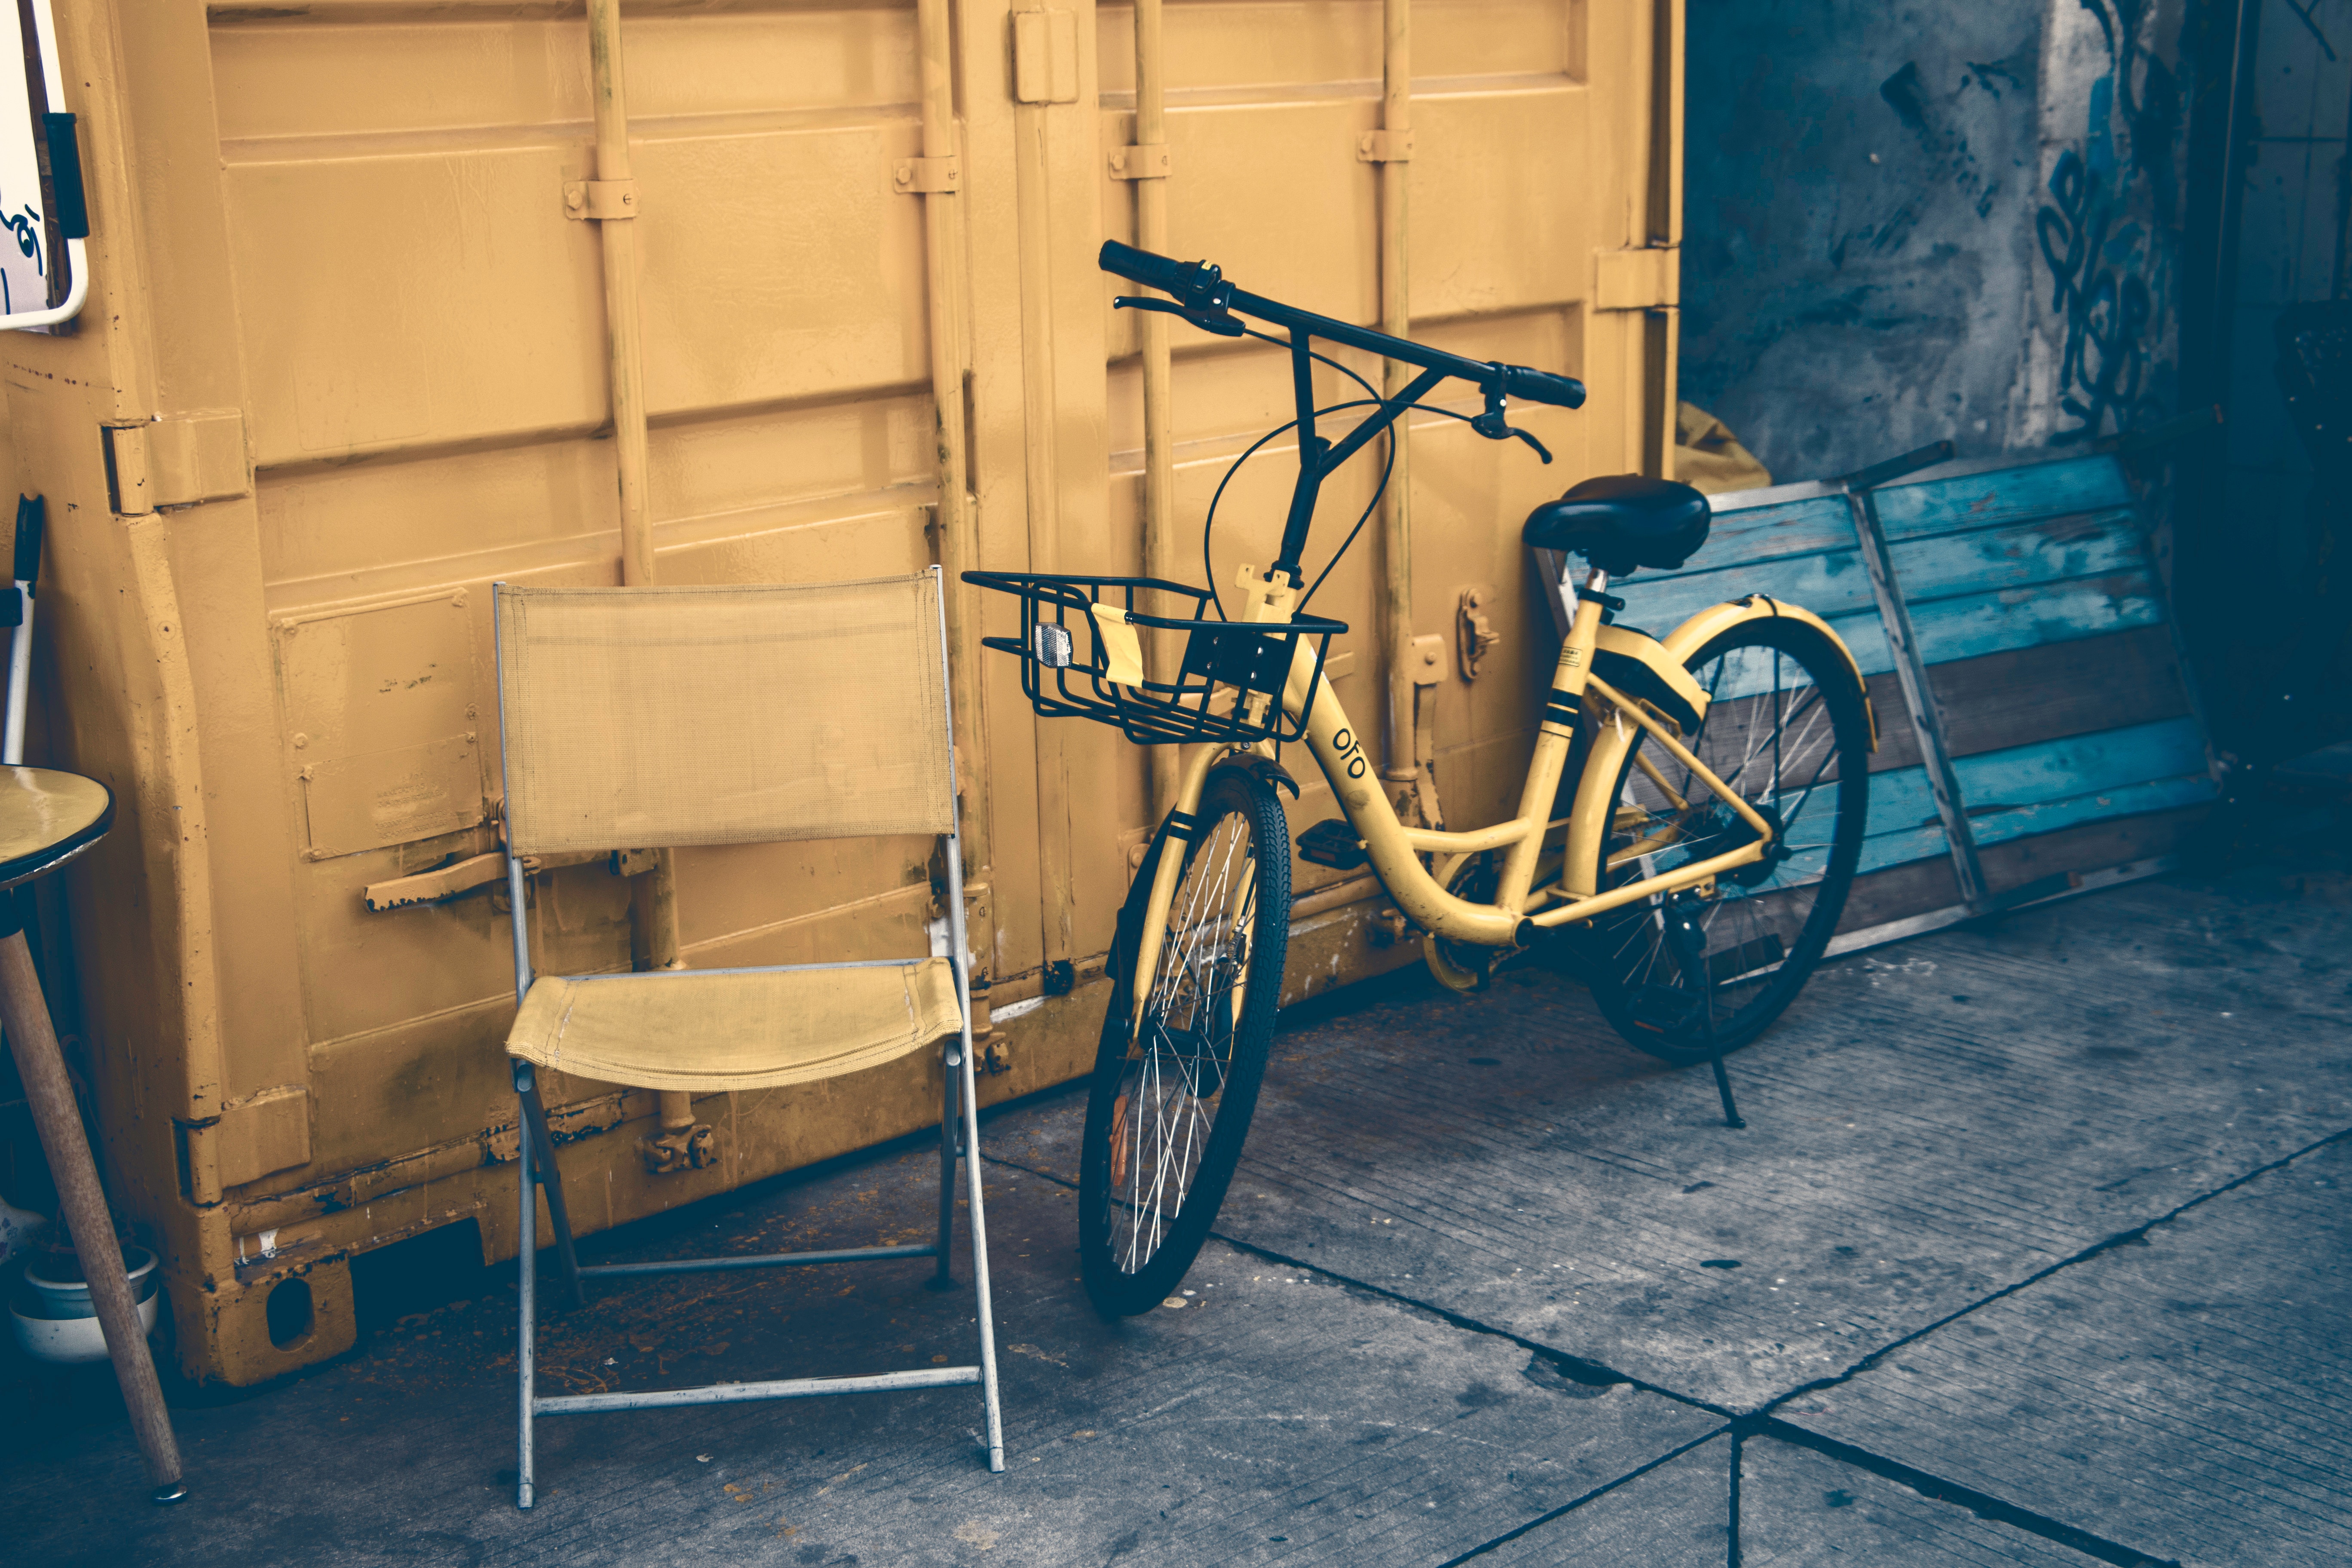 android bicycle, yellow, miscellaneous, miscellanea, door